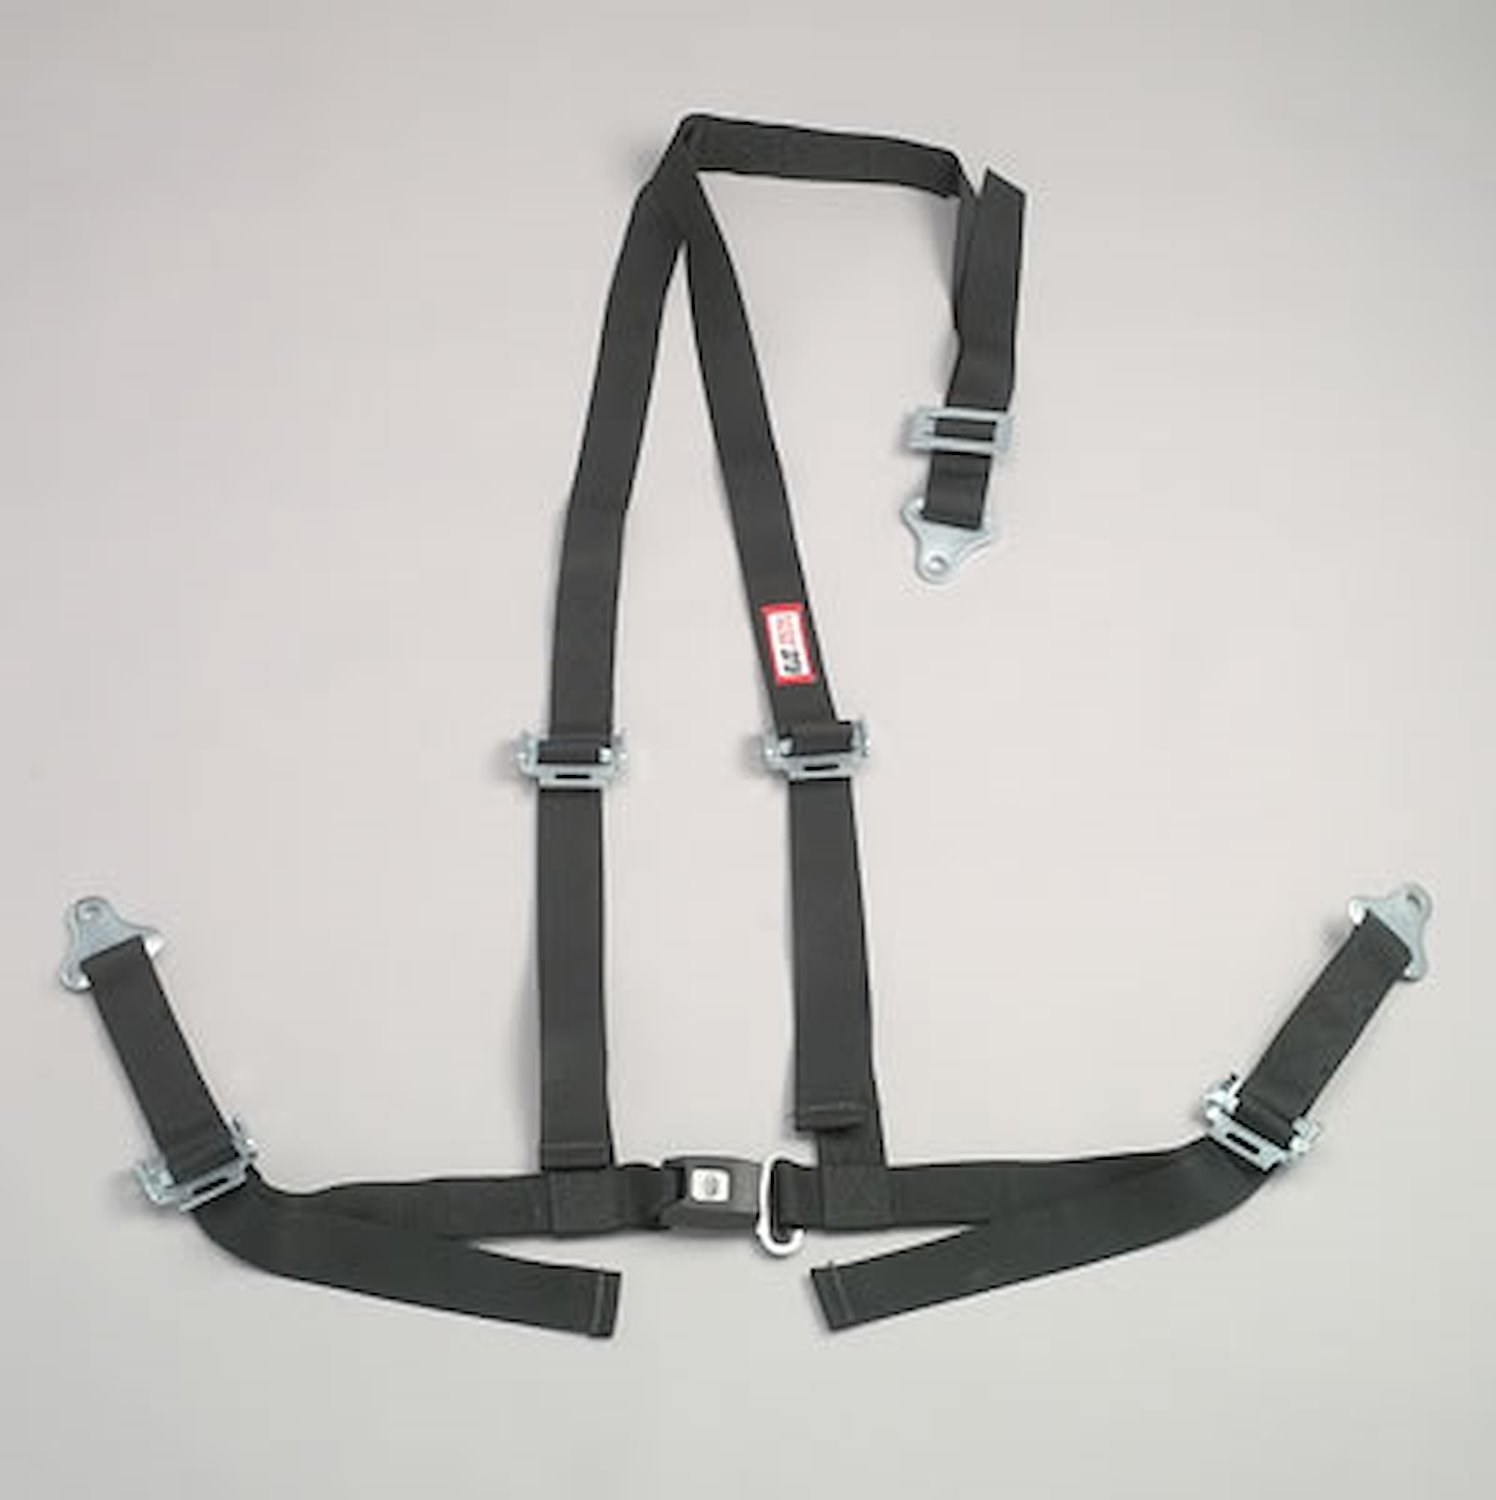 NON-SFI B&T HARNESS 2 PULL UP Lap Belt SNAP 2 S.H. INDIVIDUAL FLOOR Mount WRAP/BOLT YELLOW